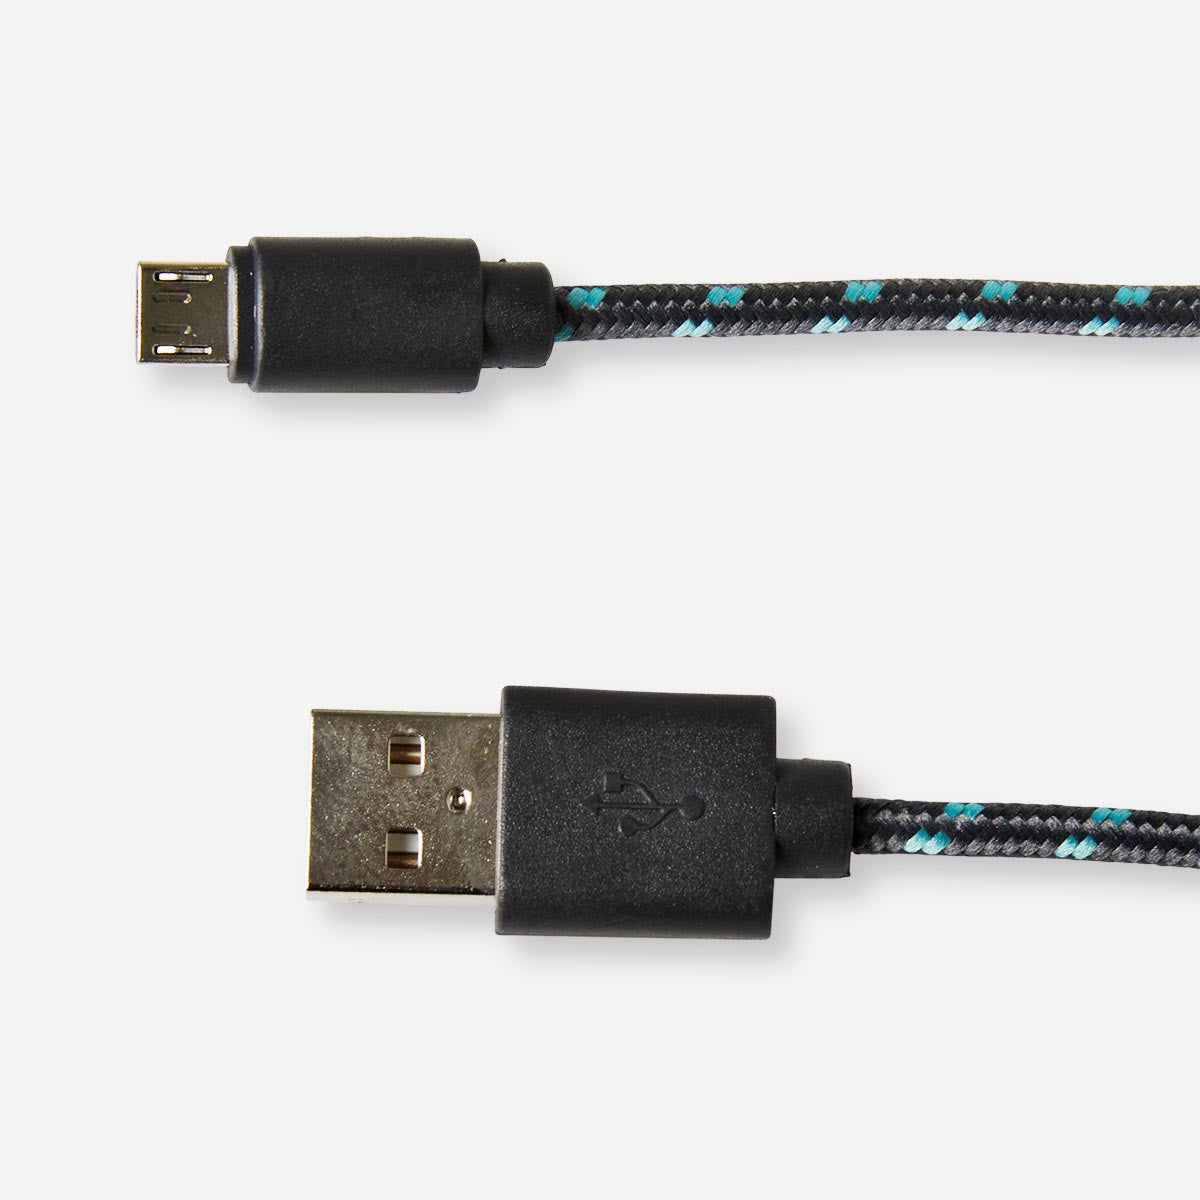 Charging cable. With micro €3| Flying